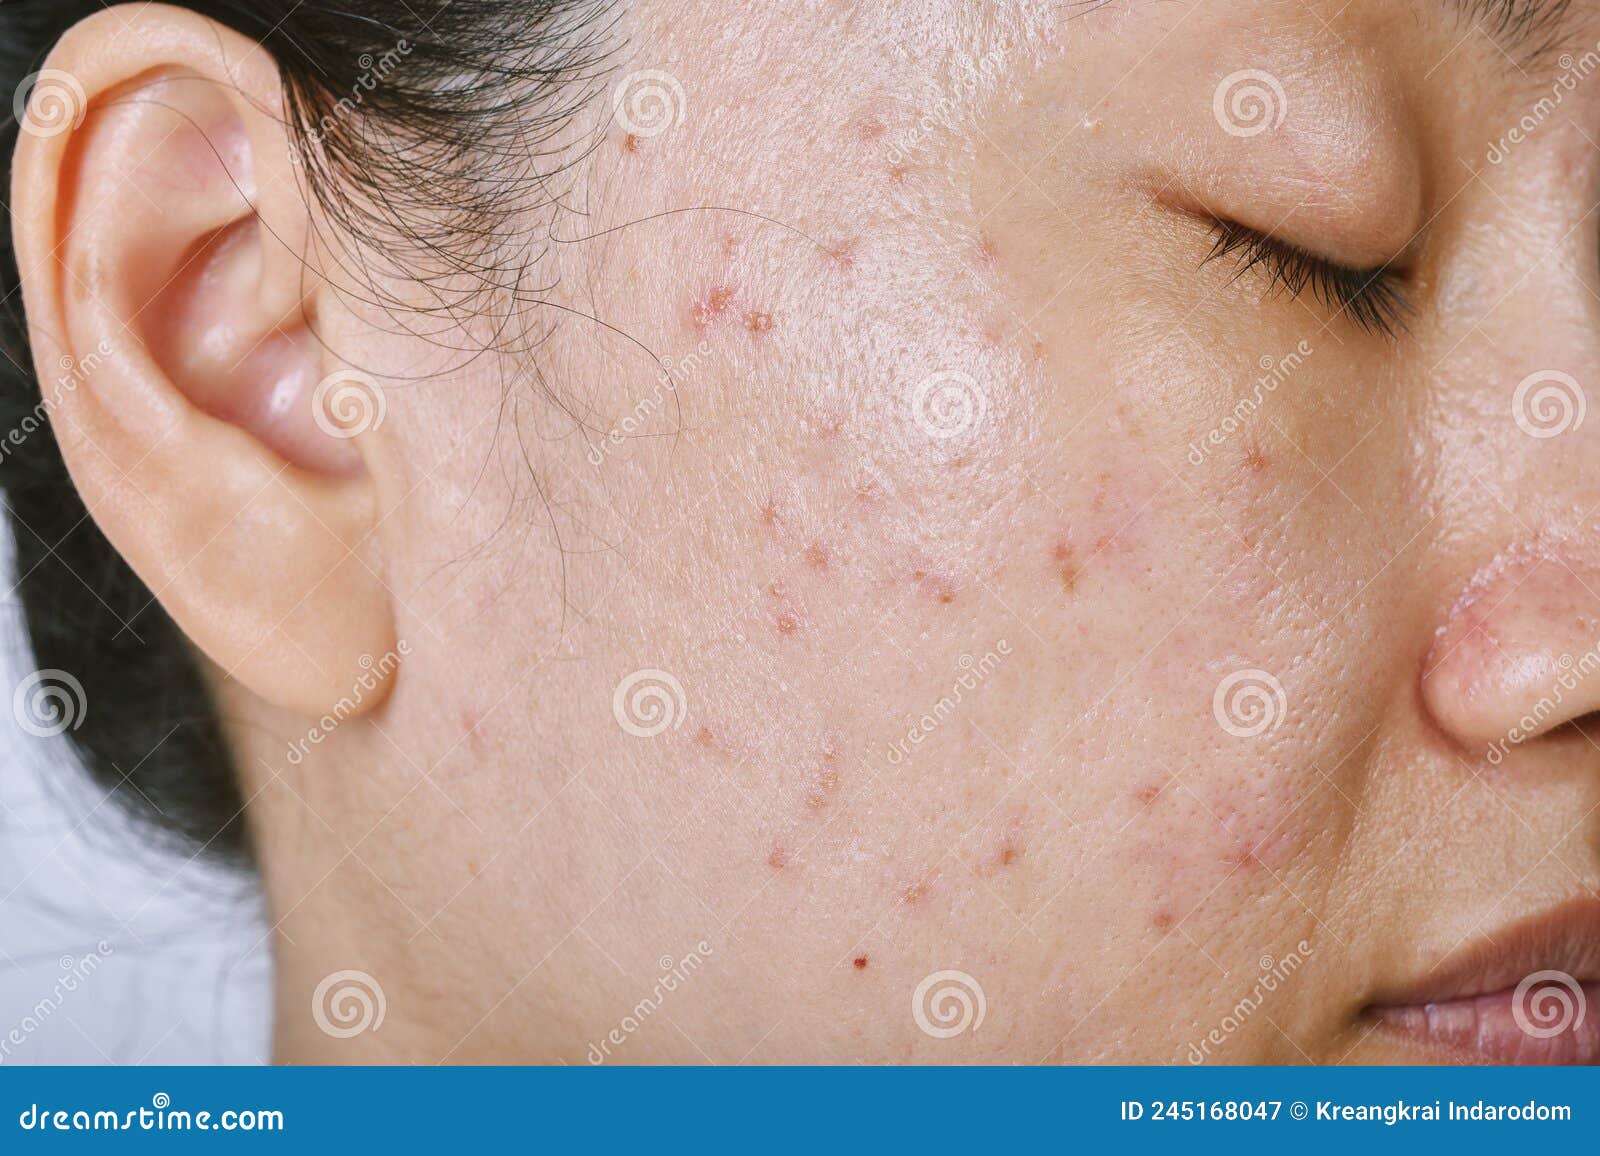 facial skin problem, acne disease in adult, close up woman face with whitehead pimples, oily greasy face